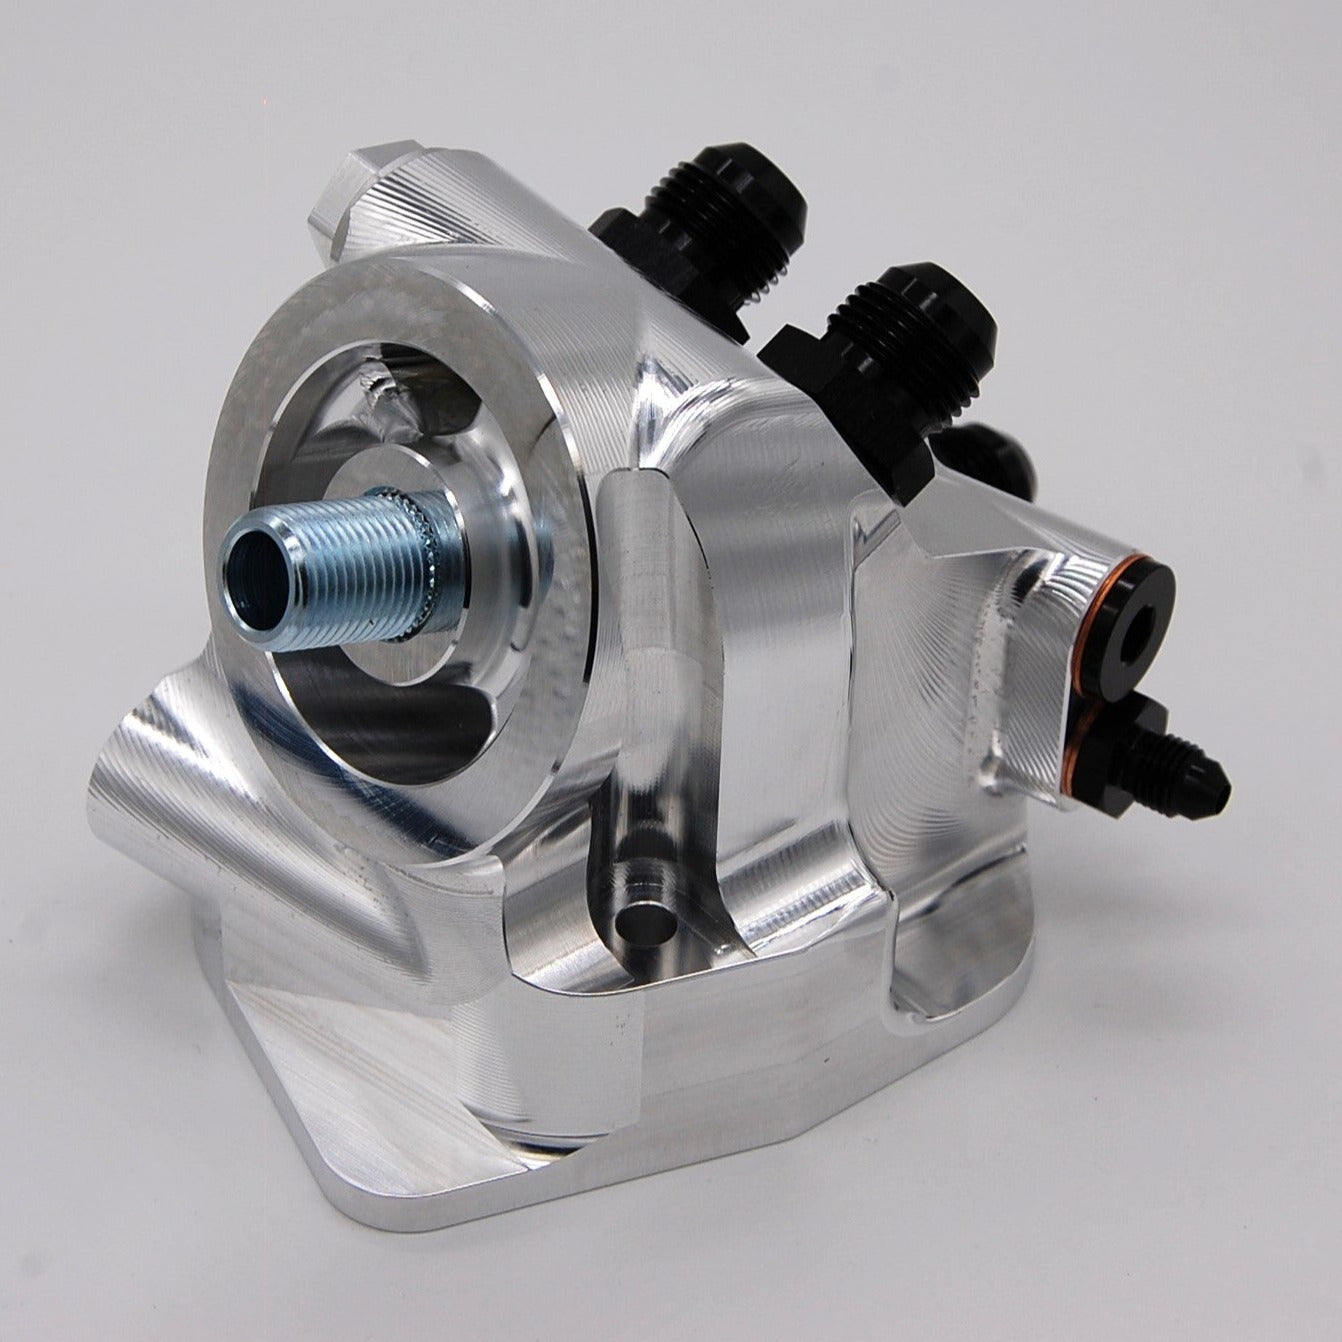 1.8T 20V / 2.0 8V – 06A (4 CYL) OIL FILTER HOUSING W/ BUILT IN THERMOSTAT